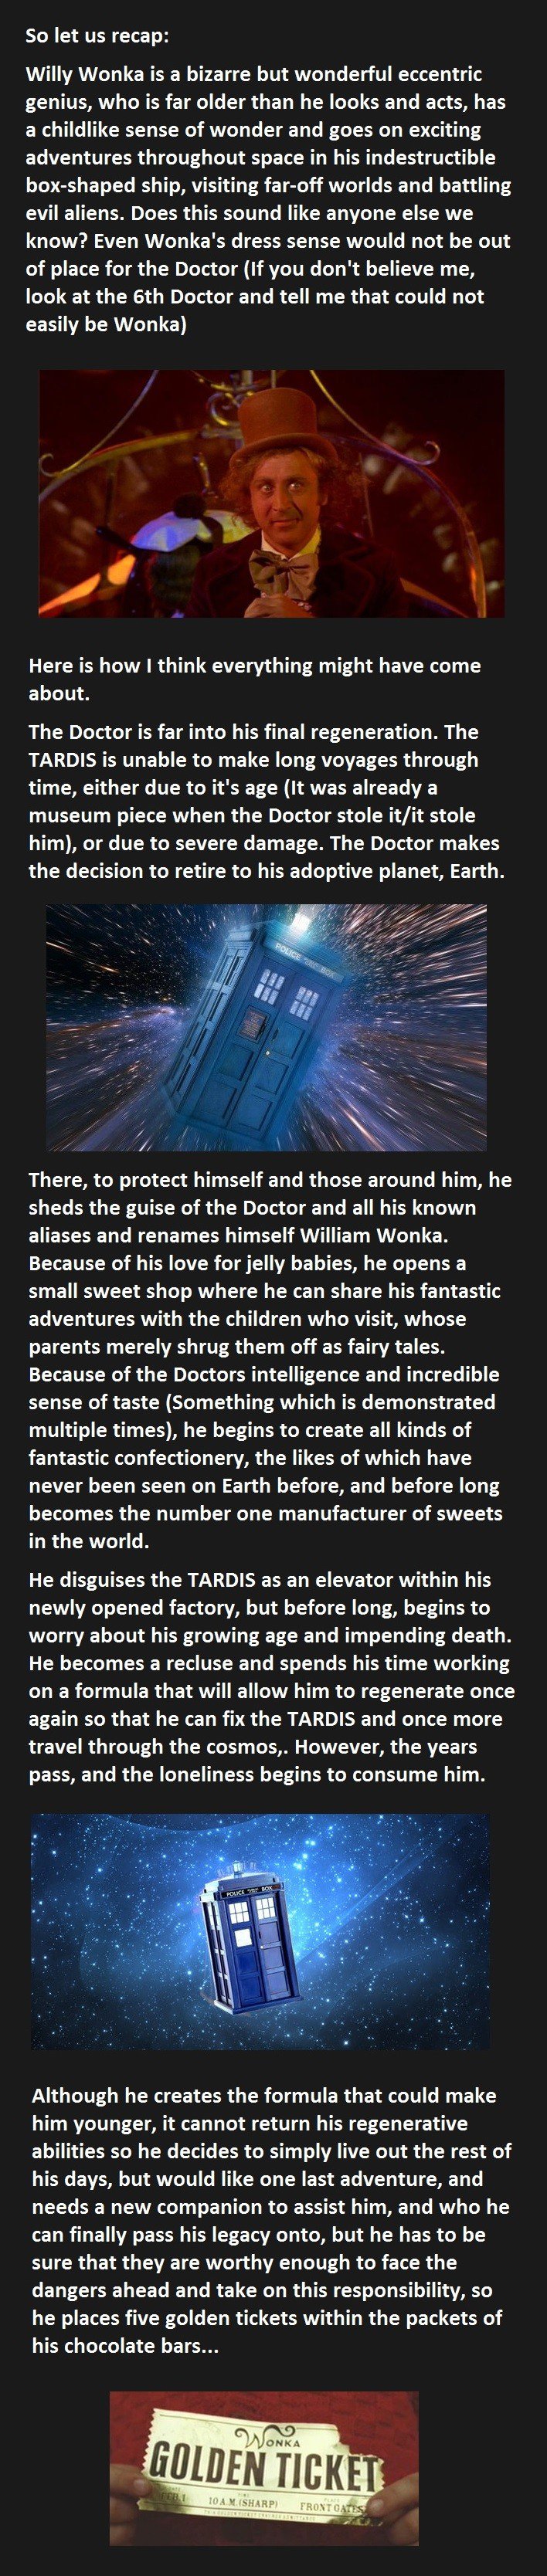 Willy Wonka Doctor Who Fan Theory